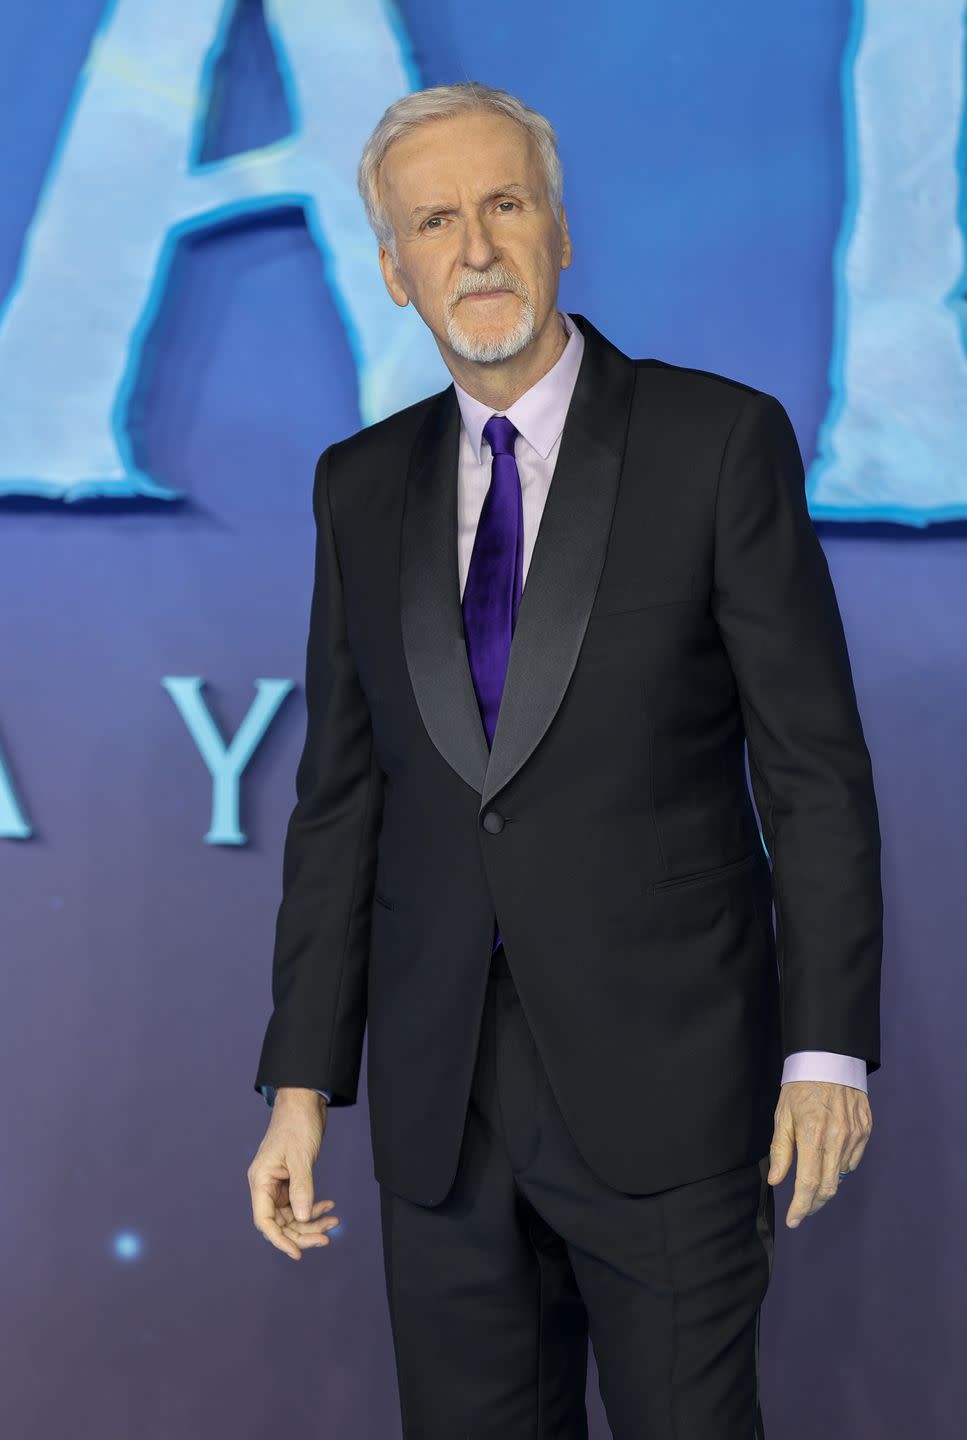 james cameron, an older man stands looking at the camera with a neutral facial expression, he wears a black suit with white shirt